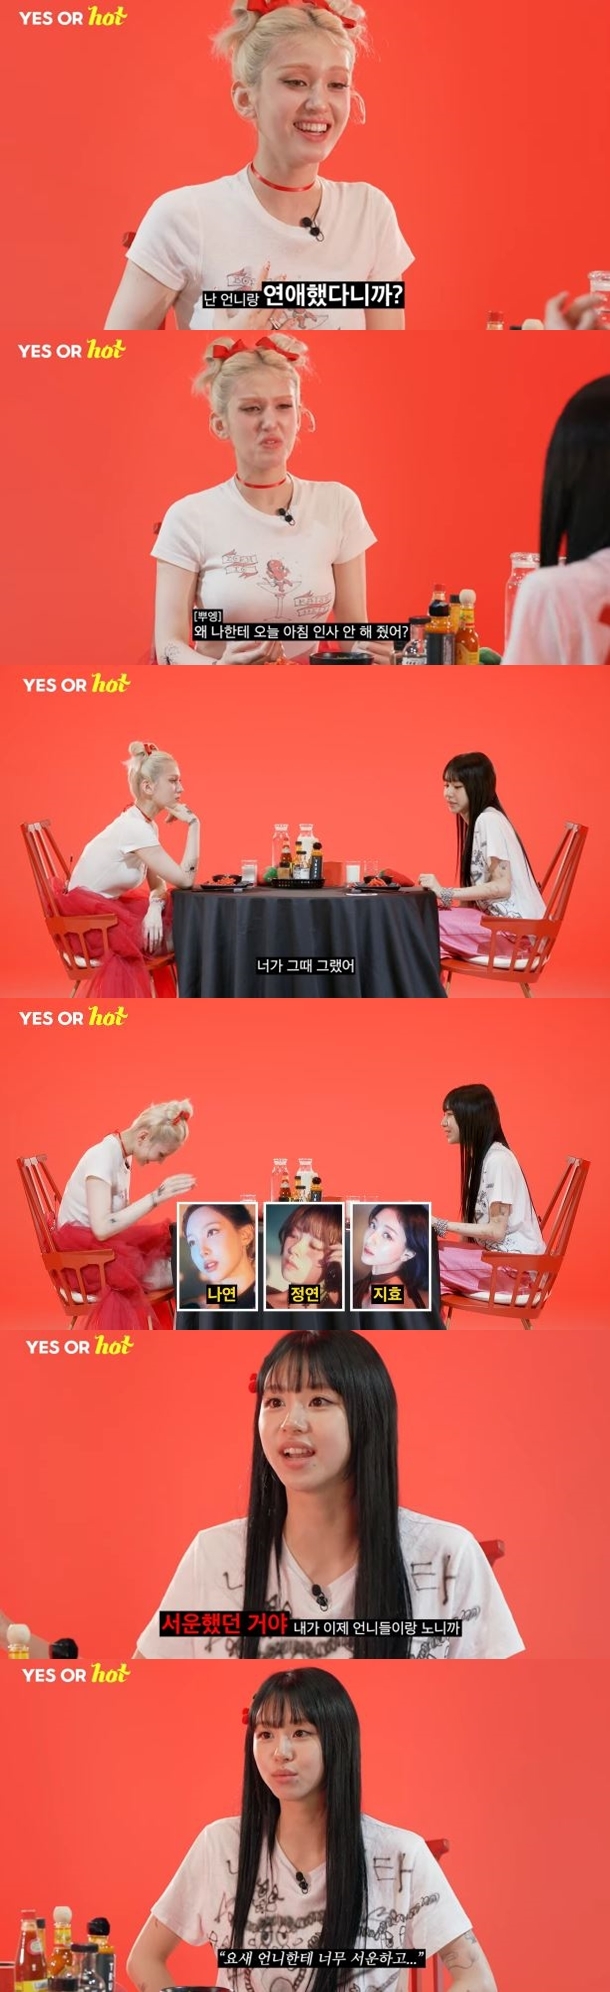 Jeon So-mi brought up an anecdote in which she was jealous of Chaeyoung.On August 30, TEO Theo said, I loved myself, I broke up alone. Sommys first love, Sister Chaeyoung!EP.2 TWICE Chaeyoung  ⁇  Yes or Hot Yes Oah Hot was posted on the video.On this day, Jeon So-mi said, I think I solved puberty to Sister. I had a relationship with Sister.He recalled the days of Idol Producer, who relied heavily on Chaeyoung, saying, I was sad because of Sister, so I went alone and cried. Why didnt you say hello to me?Chaeyoung said, When you started XIXTin, you were sad to get acquainted with Nayeon Sister, Jeongyeon Sister, and Ji Hyo Sister.So suddenly I called me and I was sad. On the other hand, Jeon So-mi and Chaeyoung spent together as JYP Entertainment Idol Producer.The two appeared on the survival program Mnet XIXTin that created TWICE, Chaeyoung debuted with TWICE, and Jeon So-mi was sadly eliminated.